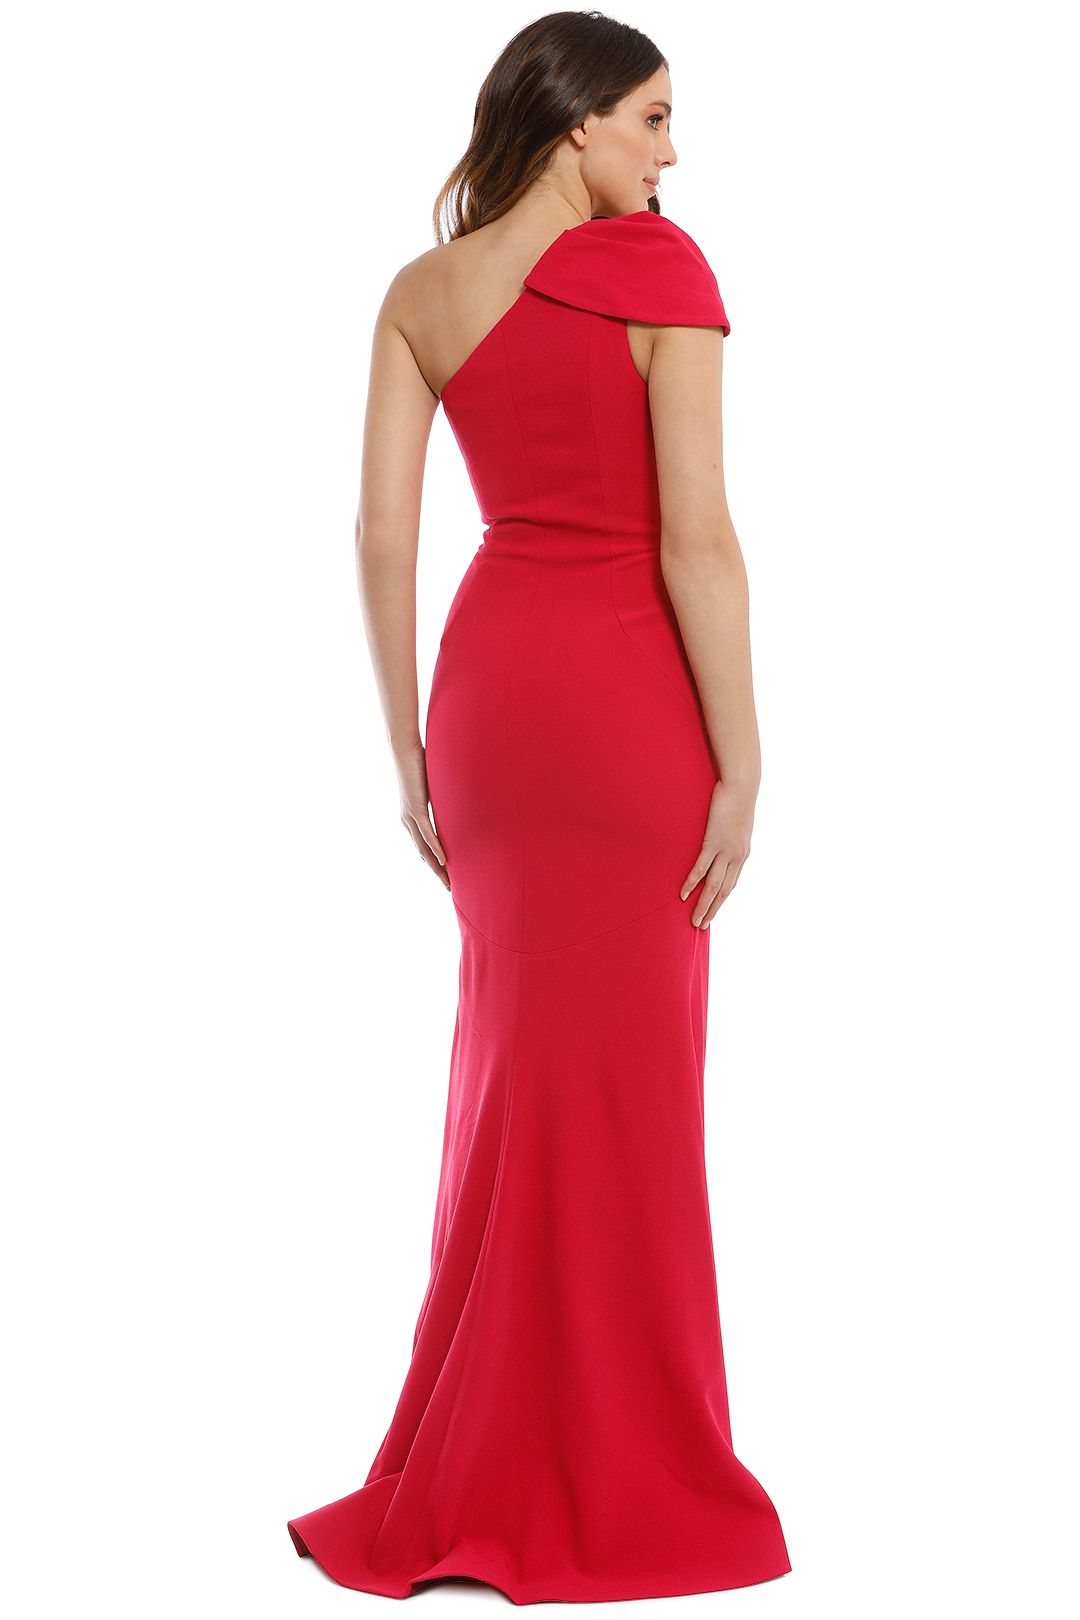 Rebecca Vallance - Poppy Gown - Red - Back